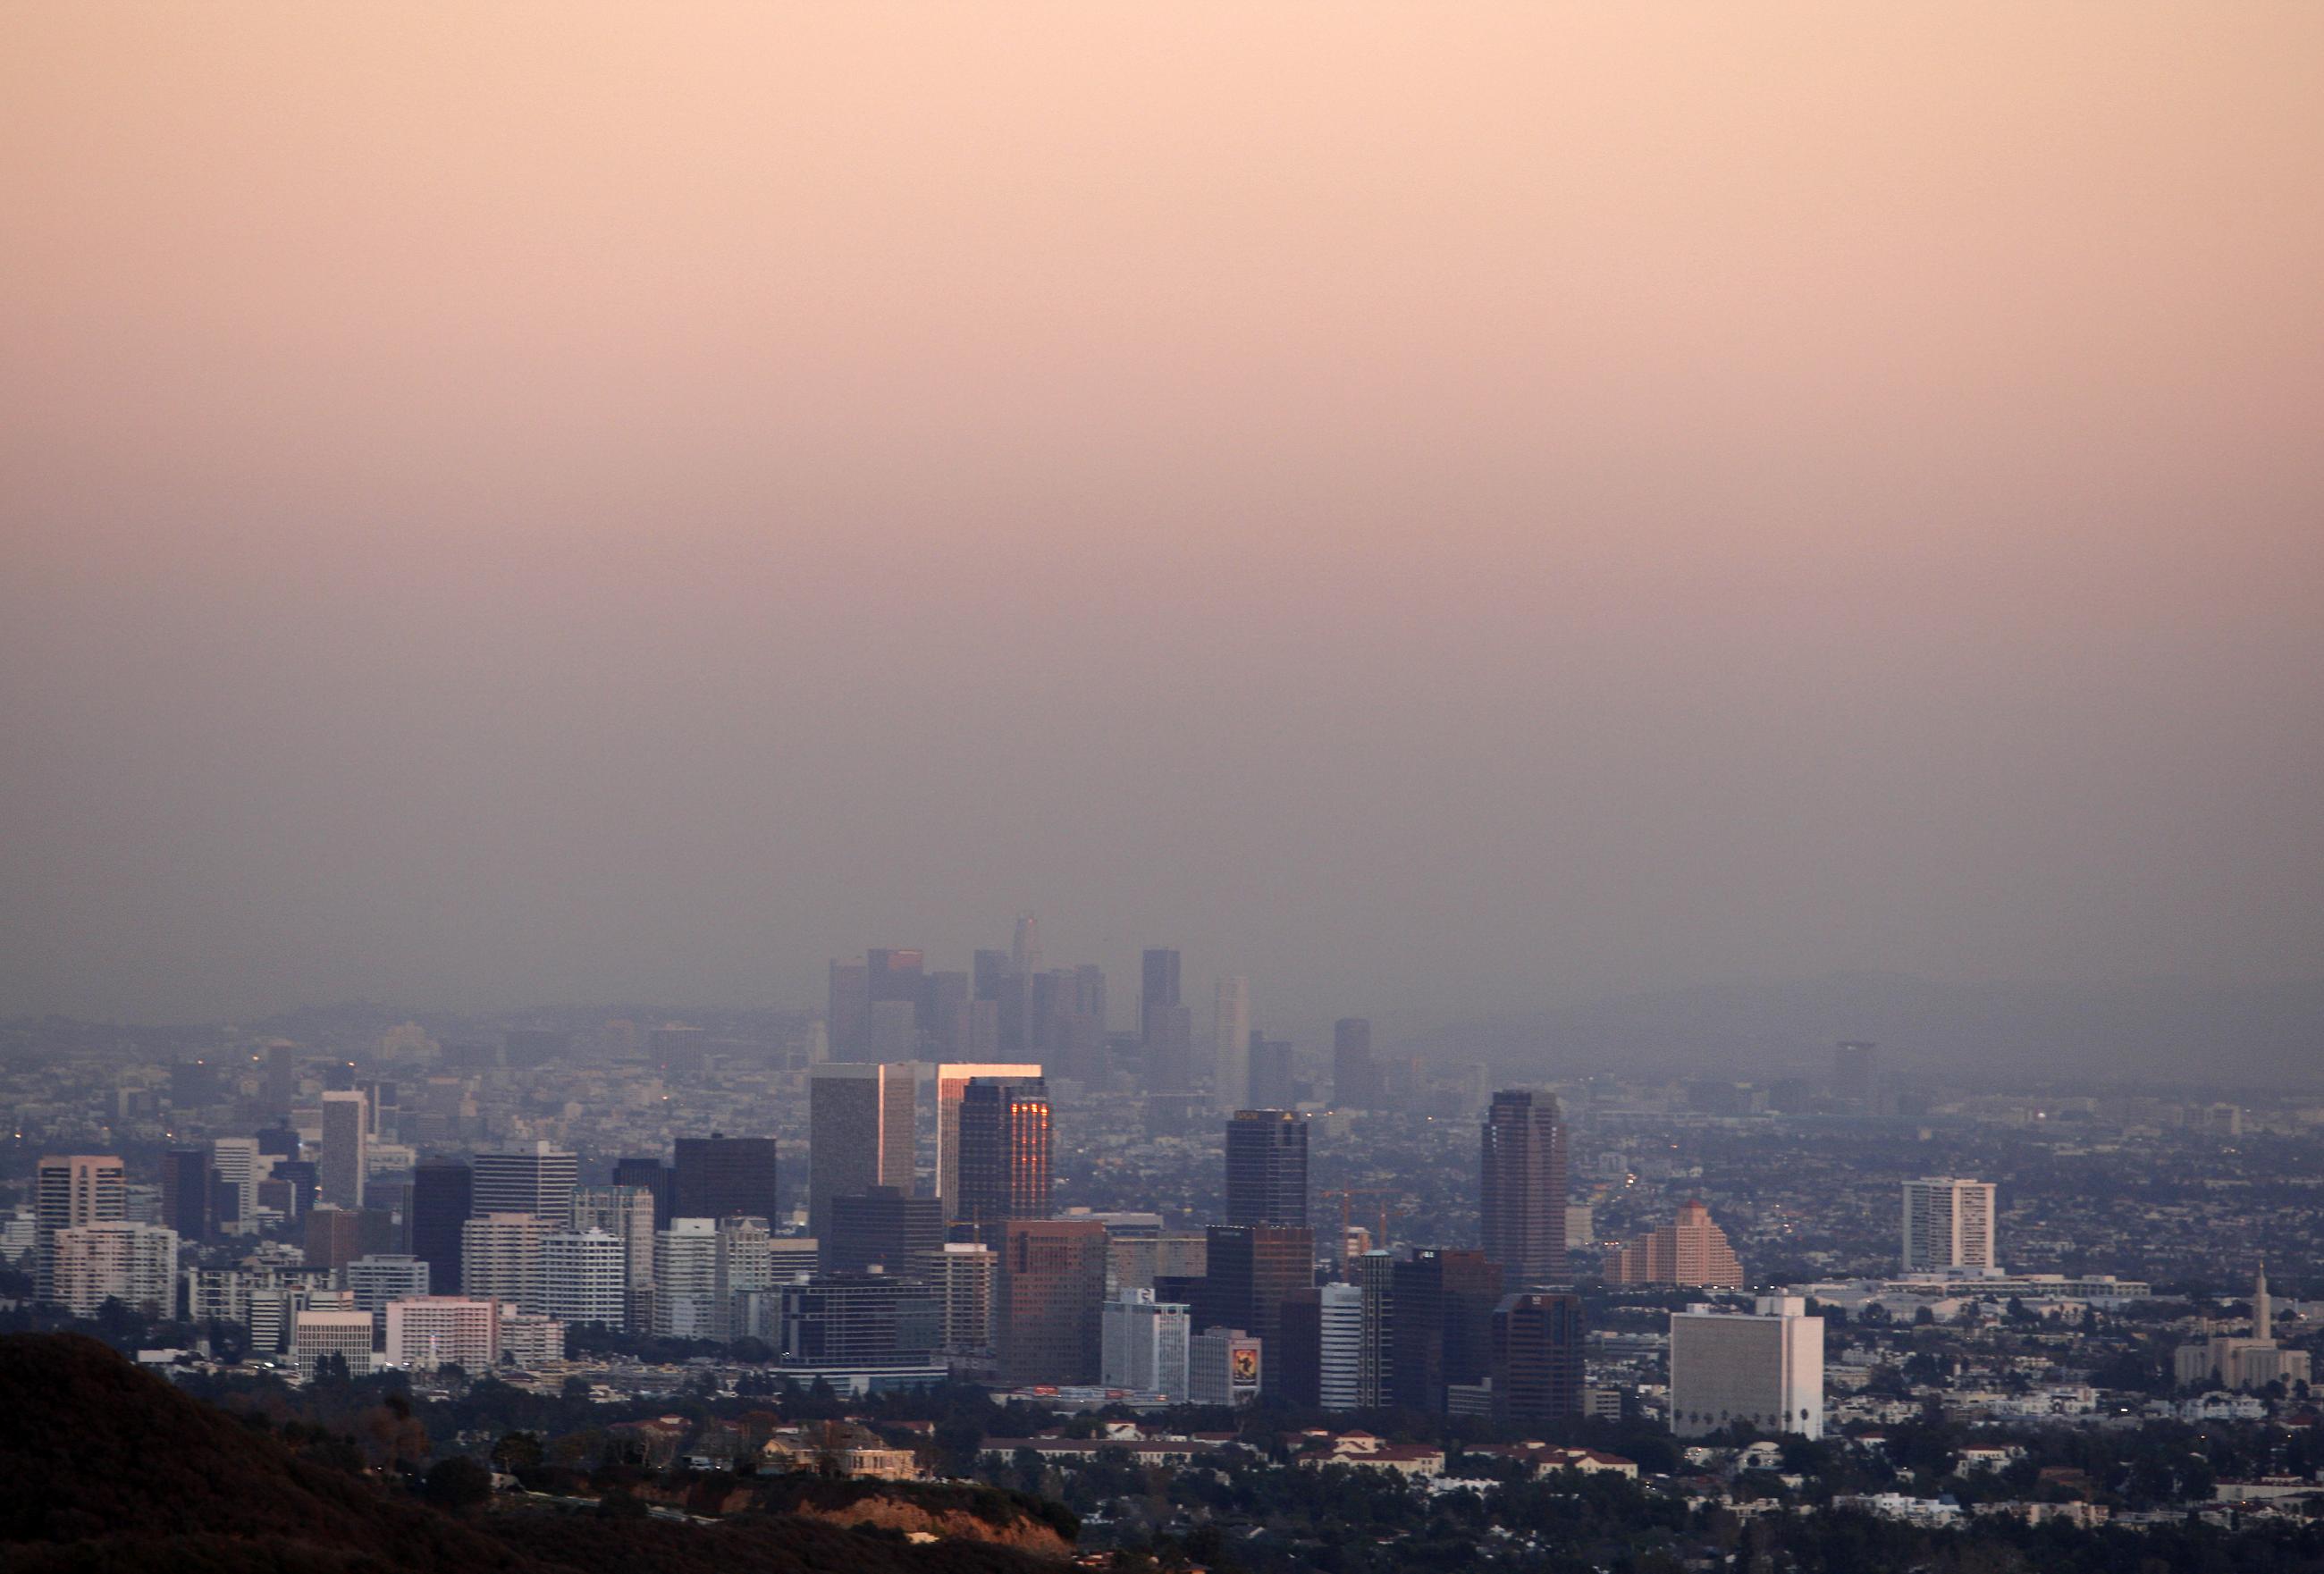 Century City and downtown Los Angeles are seen through the smog on December 31, 2007. REUTERS/Lucy Nicholson